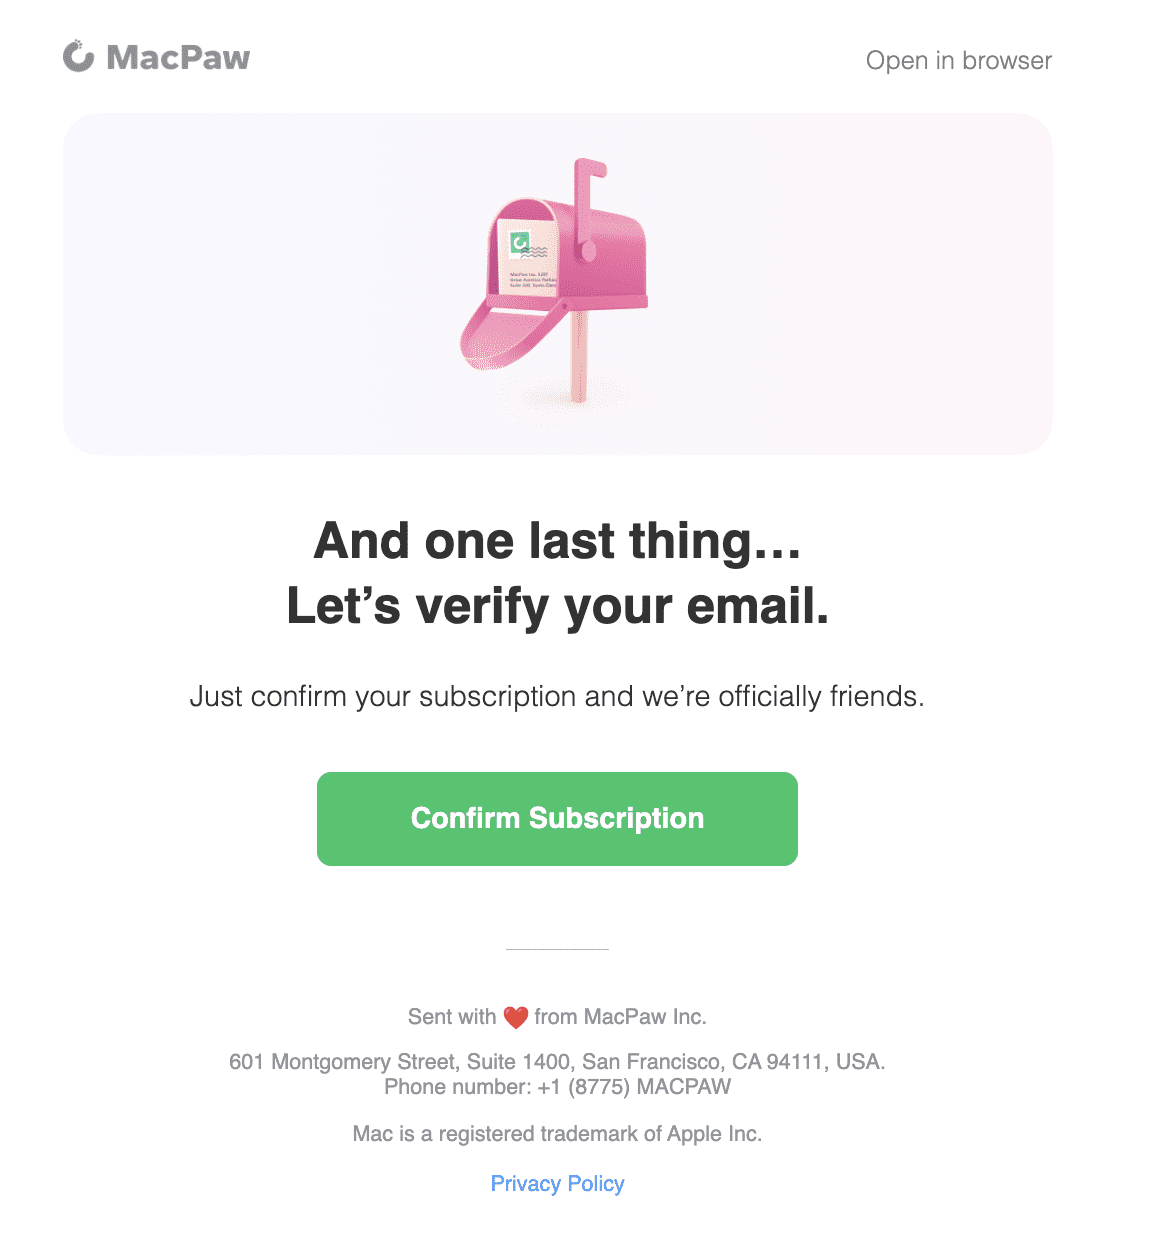 Subscription email sample for confirmed opt-in